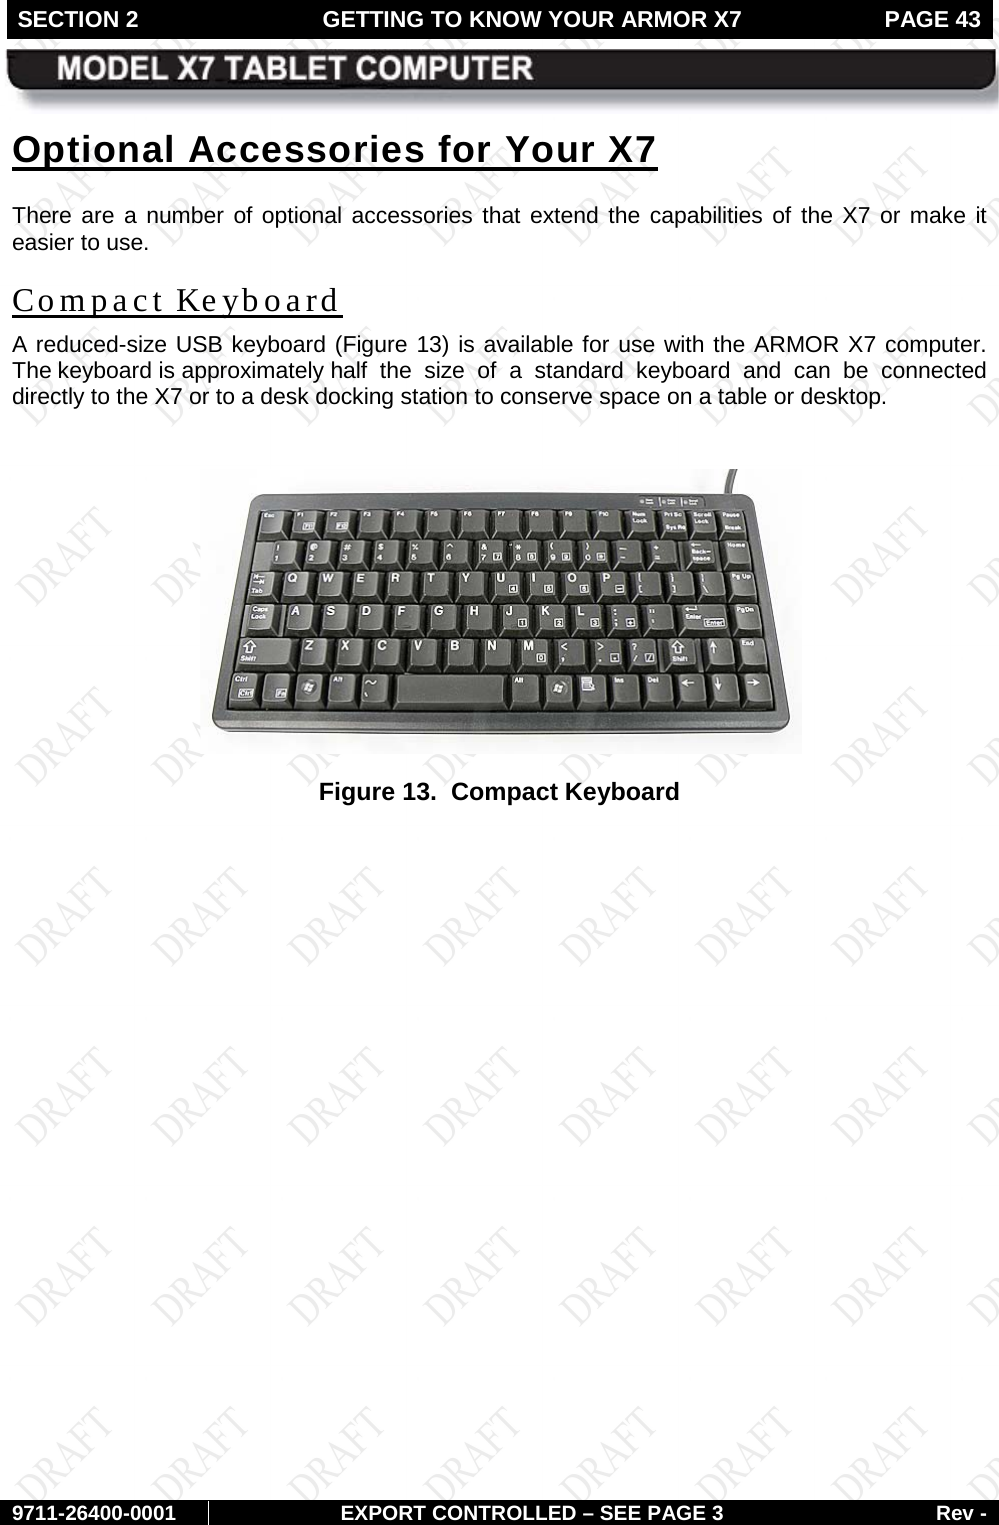 SECTION 2 GETTING TO KNOW YOUR ARMOR X7  PAGE 43        9711-26400-0001 EXPORT CONTROLLED – SEE PAGE 3 Rev - Optional Accessories for Your X7 There are a number of optional accessories that extend the capabilities of the X7 or make it easier to use. Compact Keyboard A reduced-size USB keyboard (Figure 13) is available for use with the ARMOR X7 computer. The keyboard is approximately  half the size of a standard keyboard and can be connected directly to the X7 or to a desk docking station to conserve space on a table or desktop.   Figure 13.  Compact Keyboard     